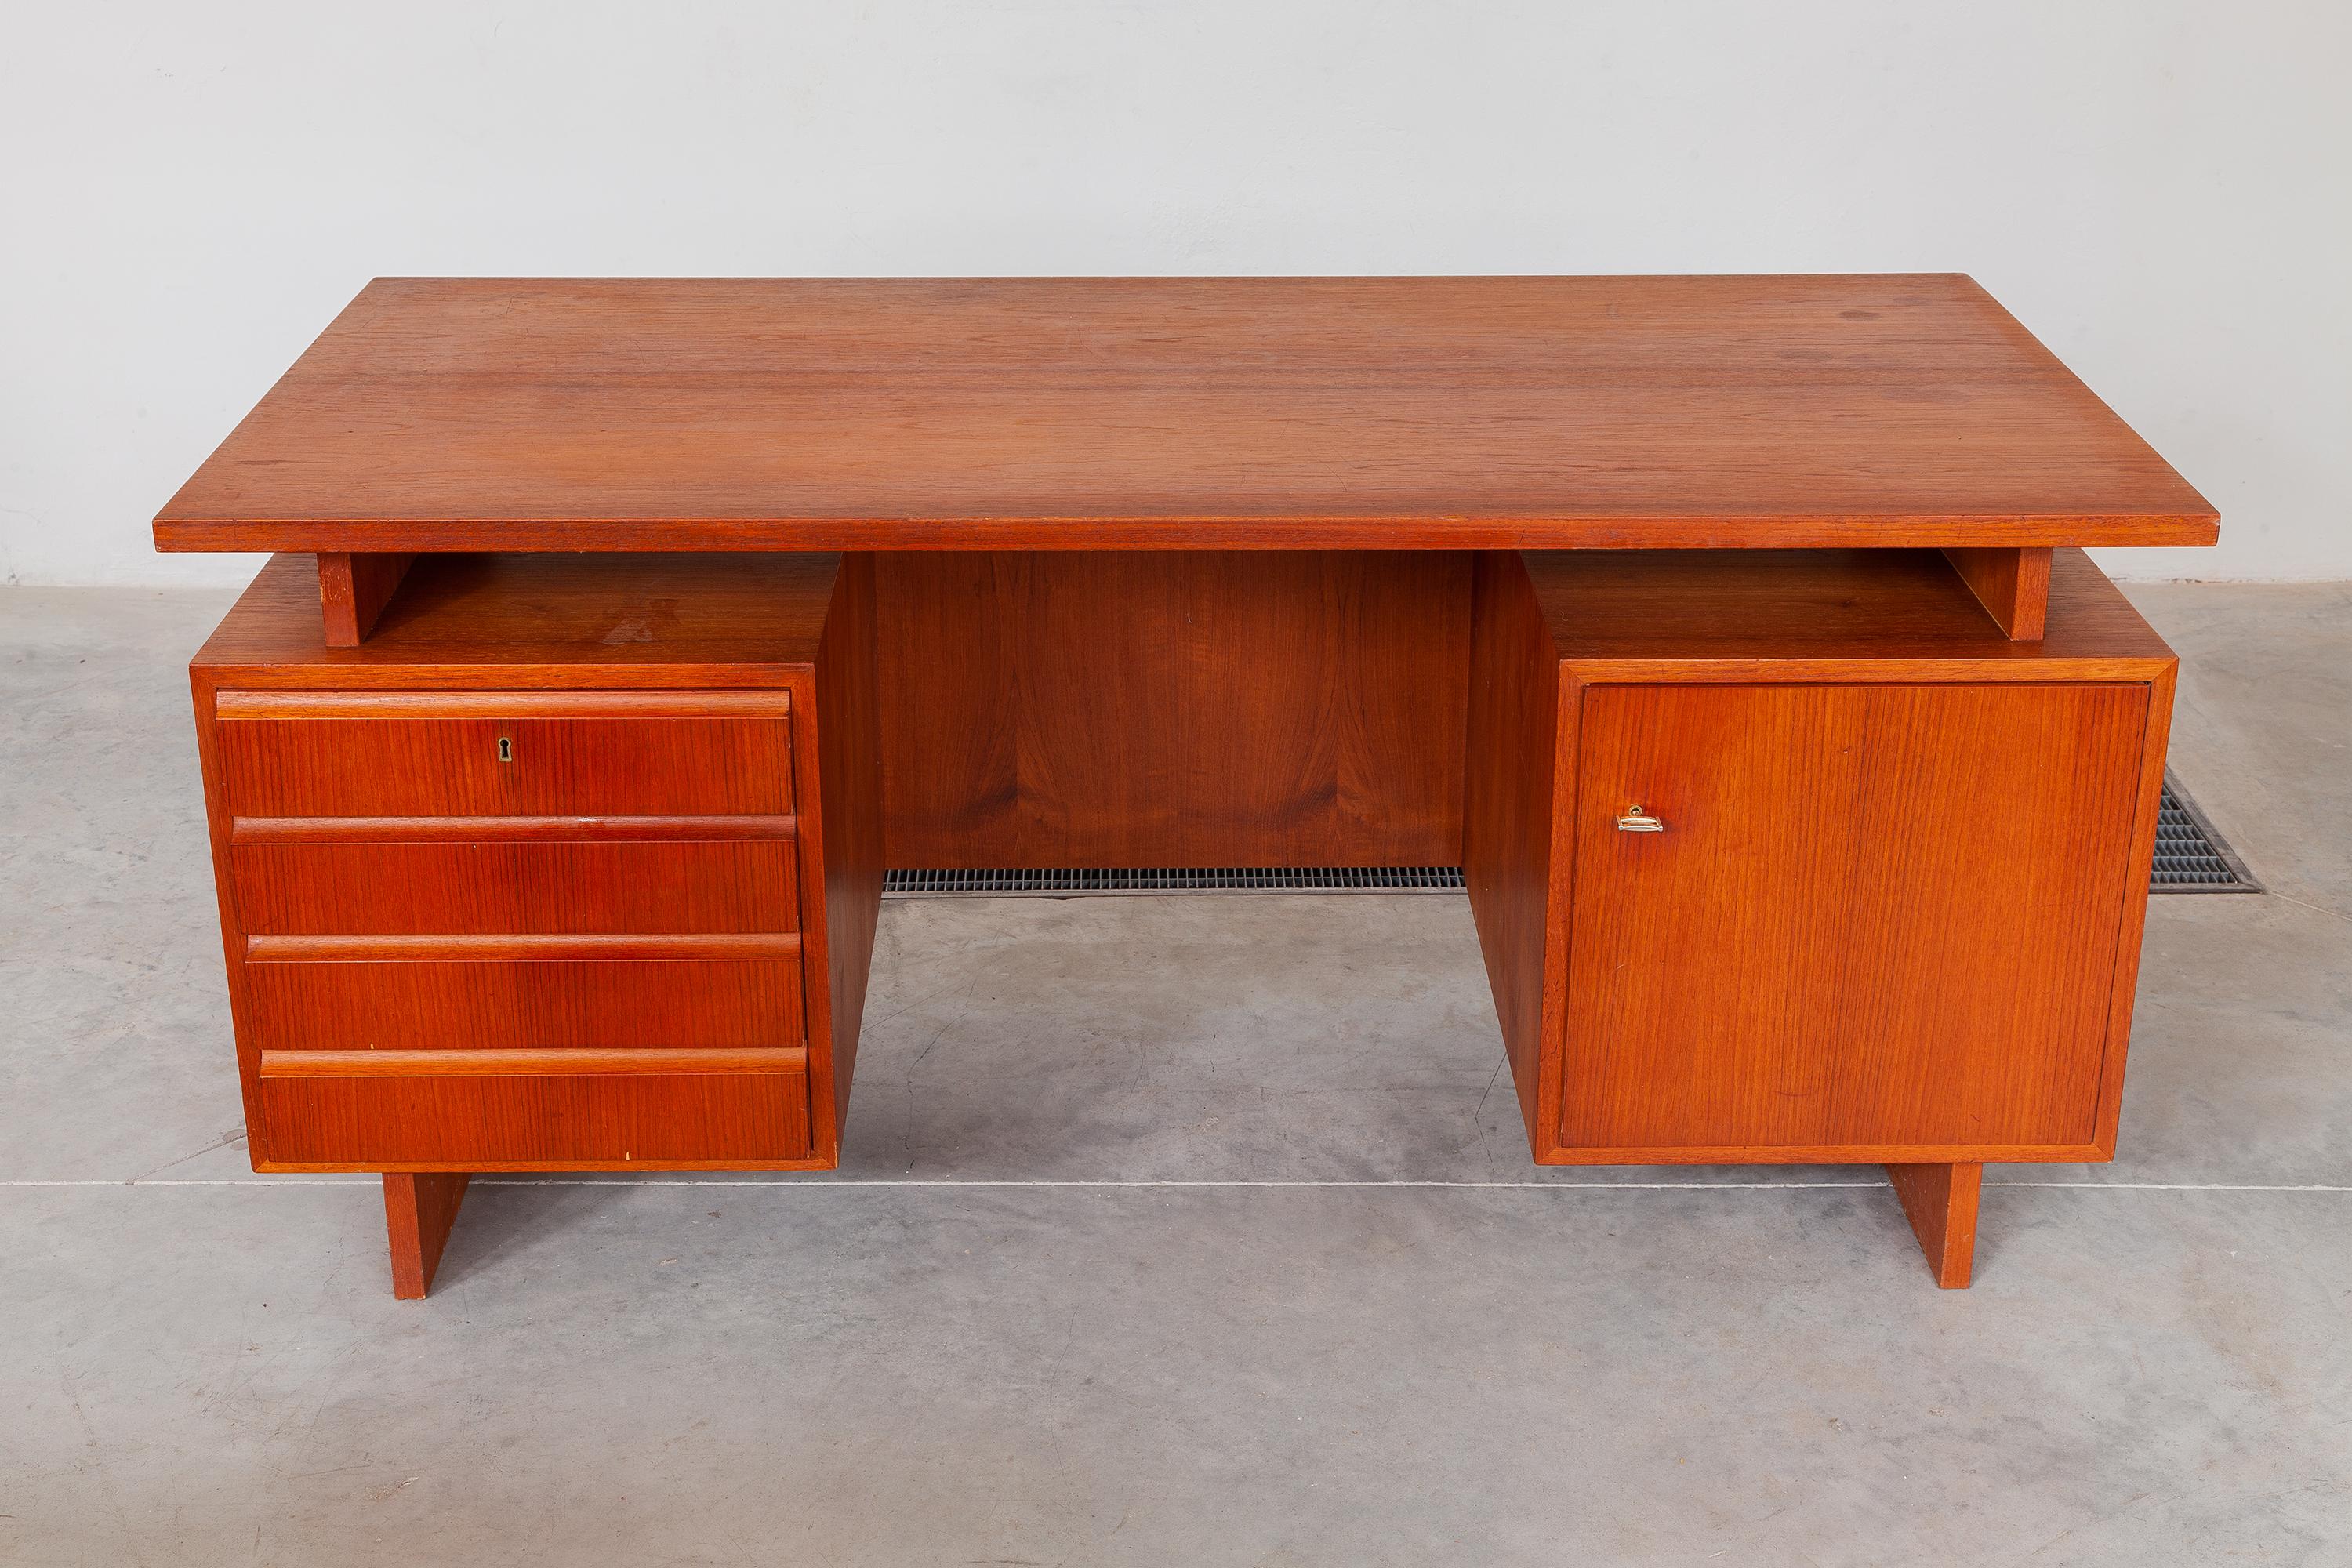 Vintage midcentury teak desk. The floating top design rests on one large cabinet with one shelve and one with four drawers. Dimensions: 160 W x 74 H x 80 D cm.